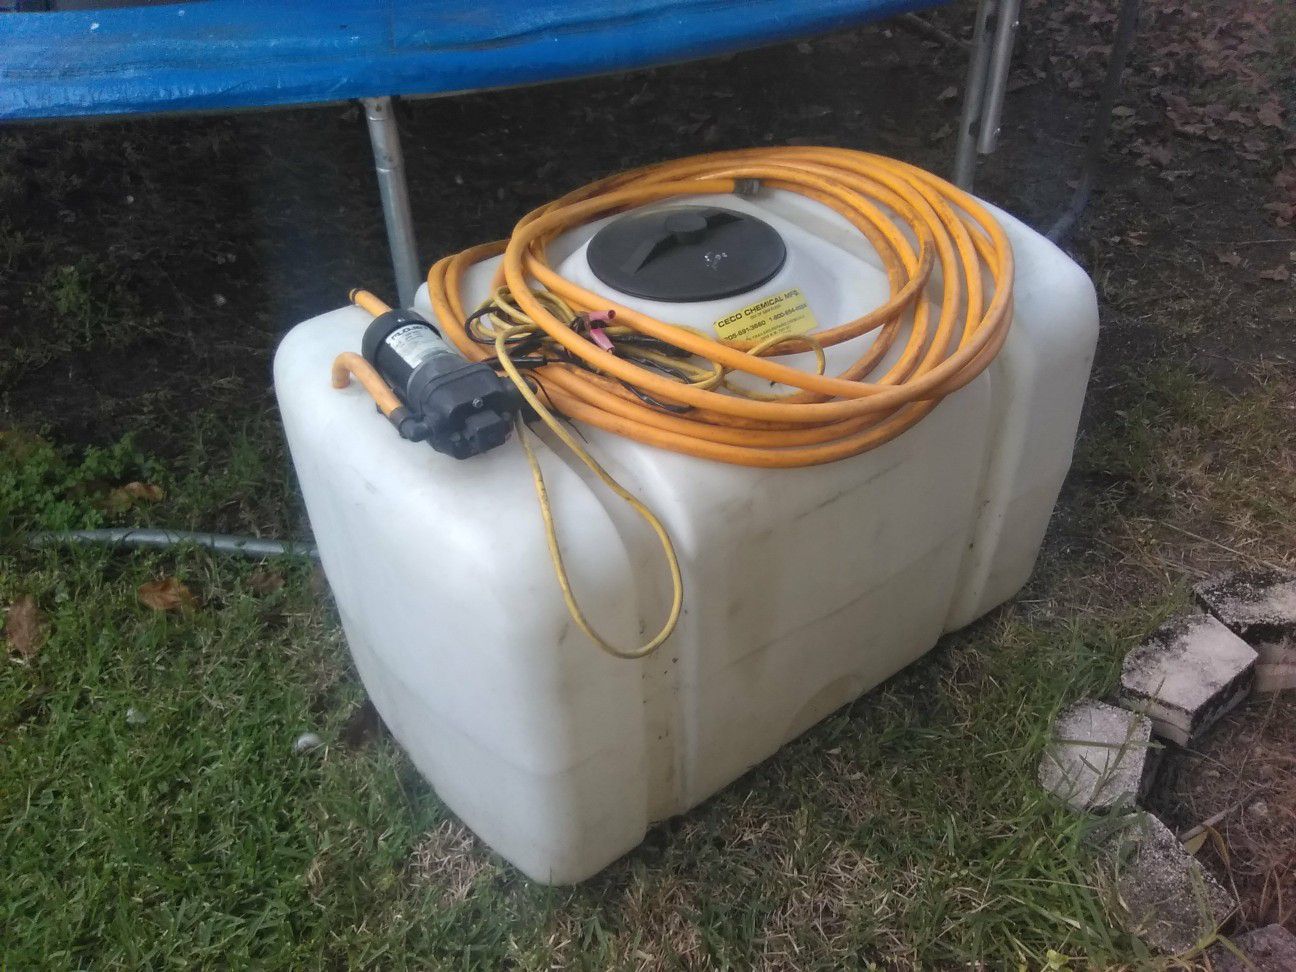 100 gallons tank with a 95 psi Flo jet pump already installed with battery terminals and 50' high pressure hose for Detailing or pest control Etc.